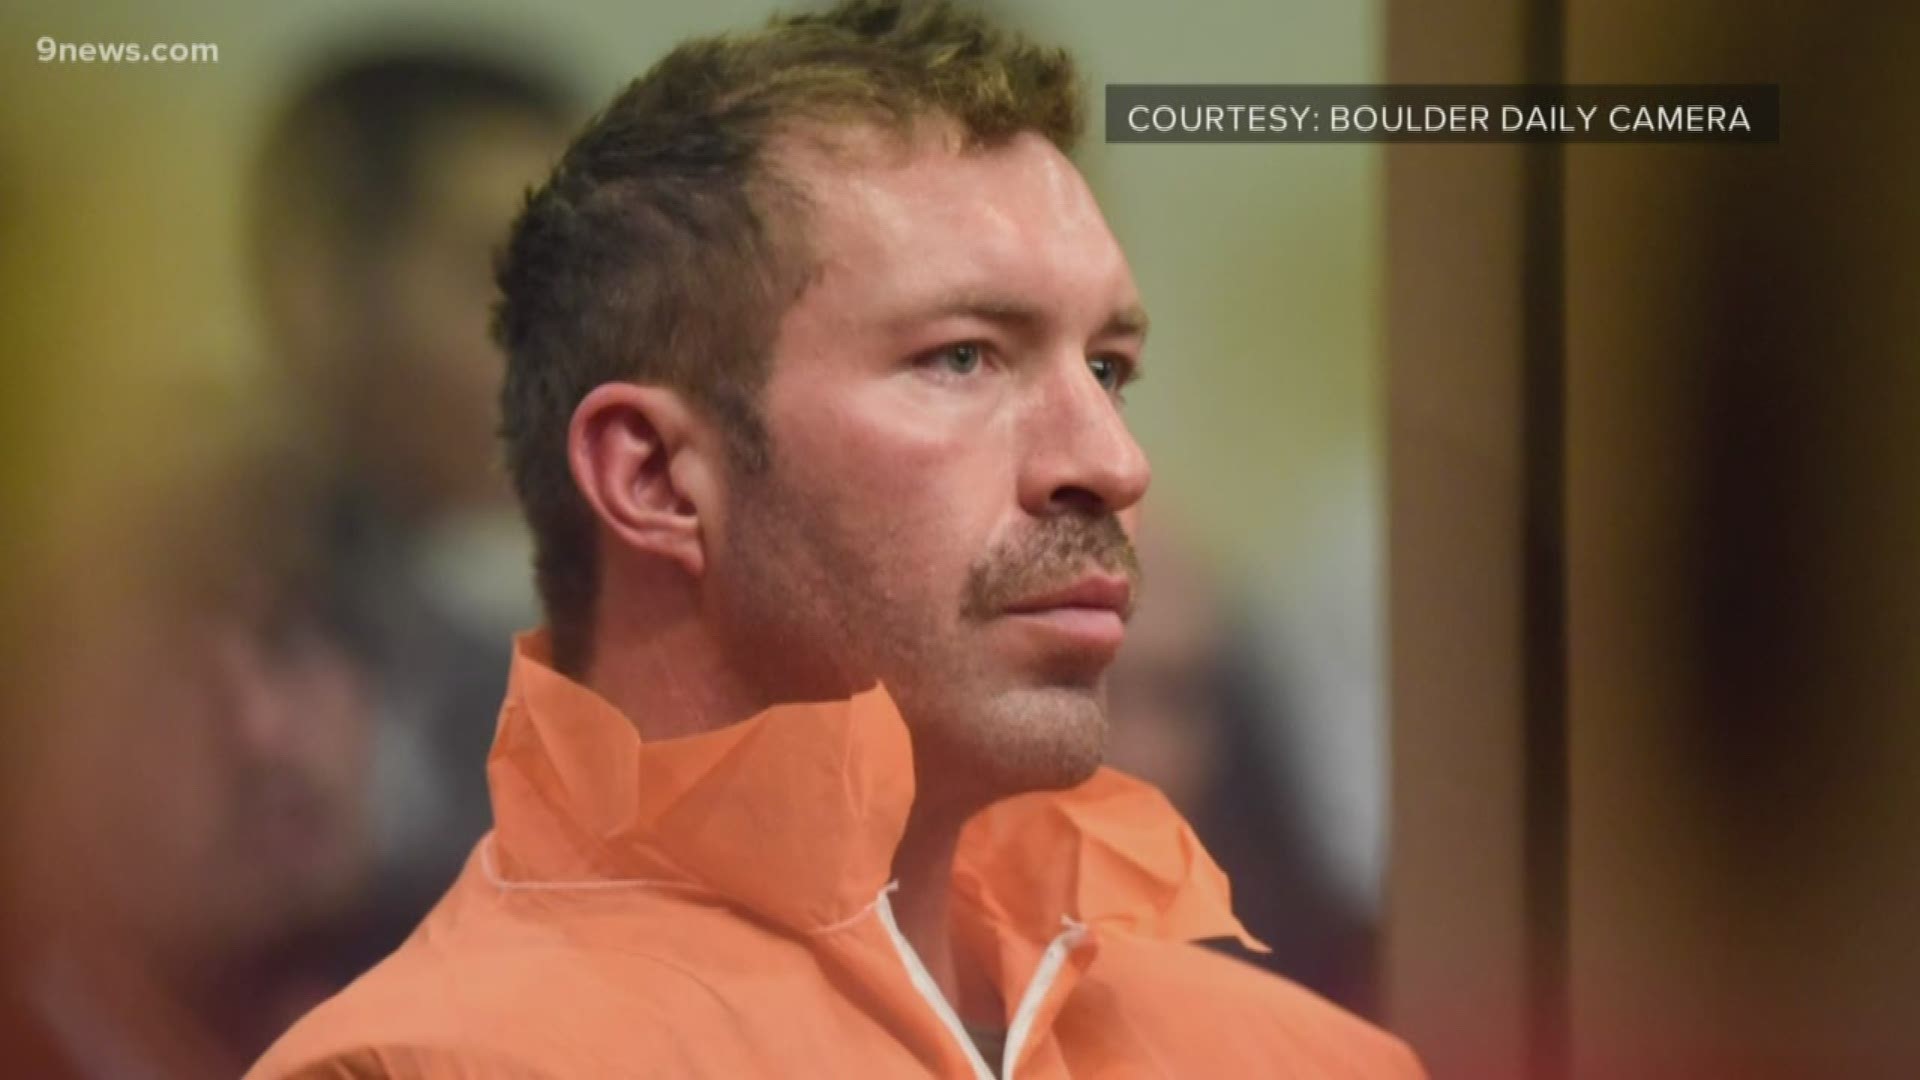 Justin Bannan, 40, appeared in Boulder County court, where he's accused of shooting a woman during a cocaine binge.